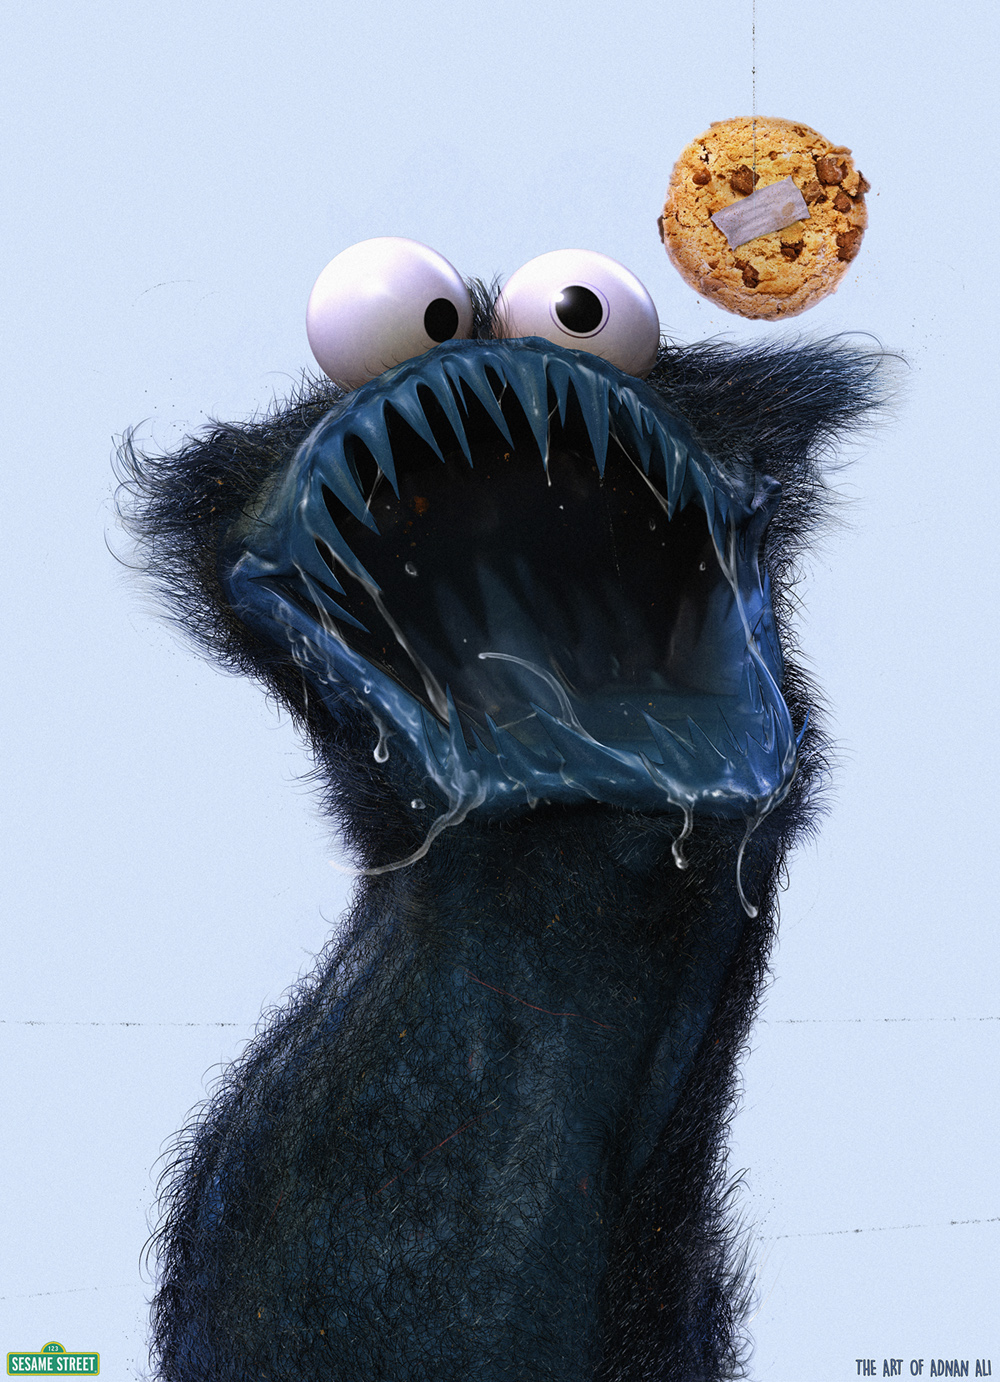 Zbrush photoshop portrait character designs sesame street cookie monster Oscar the Grouch